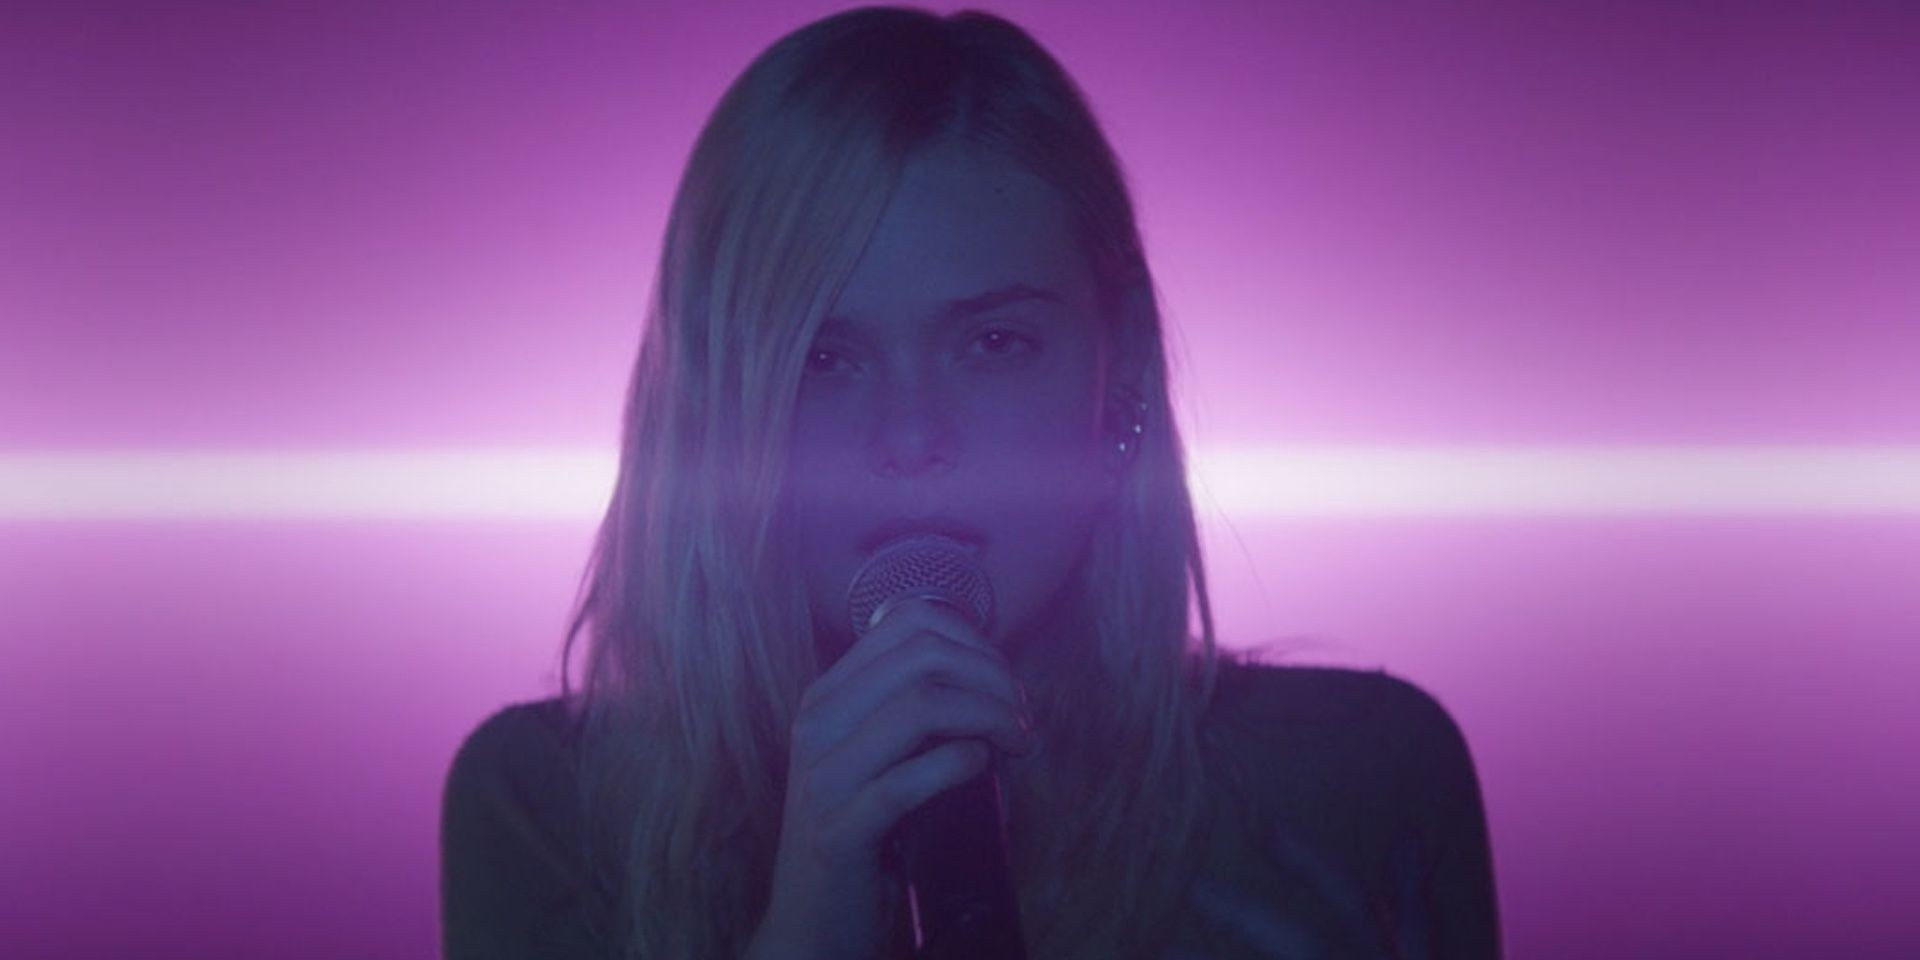 Elle Fanning covers 'Lights' by Ellie Goulding in new trailer for Teen Spirit – watch 